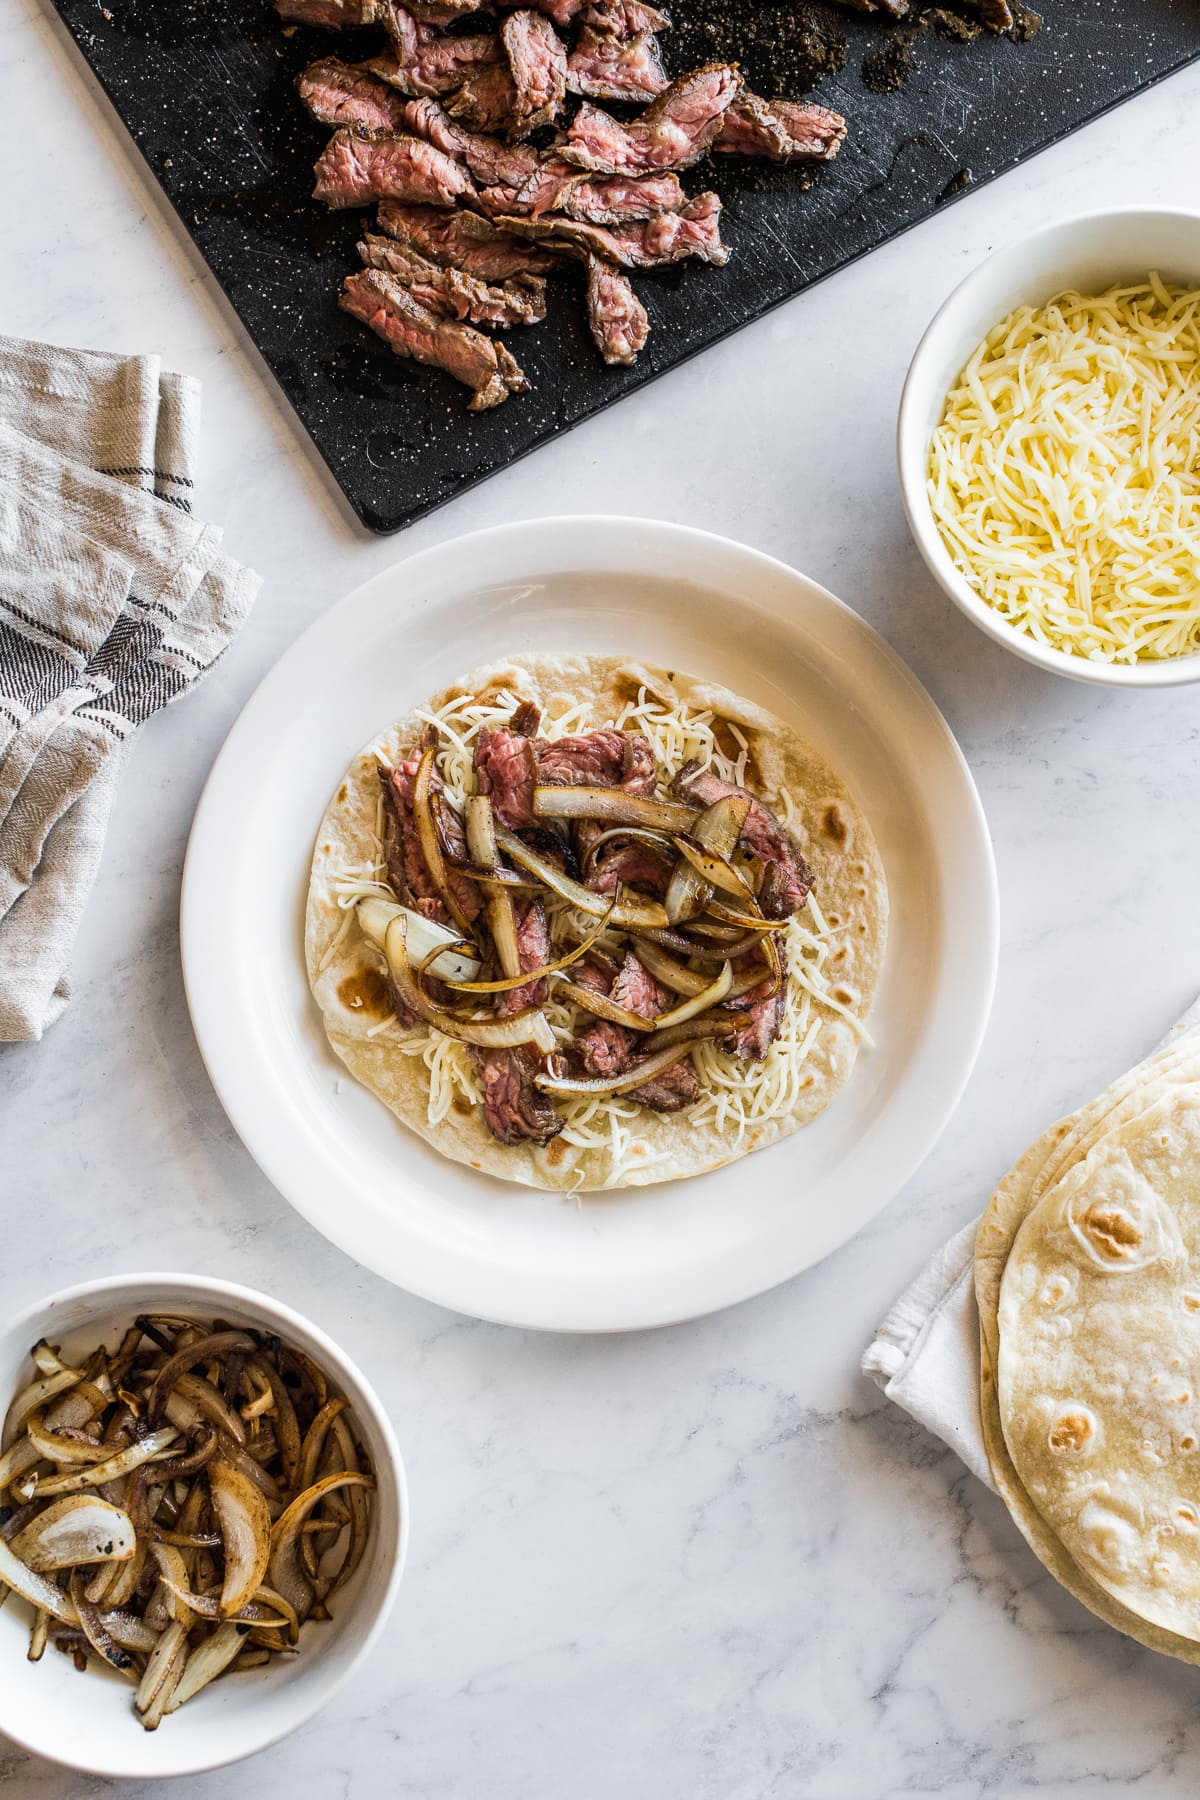 A steak quesadilla being assembled with sliced steak, shredded cheese, and sauteed onions.